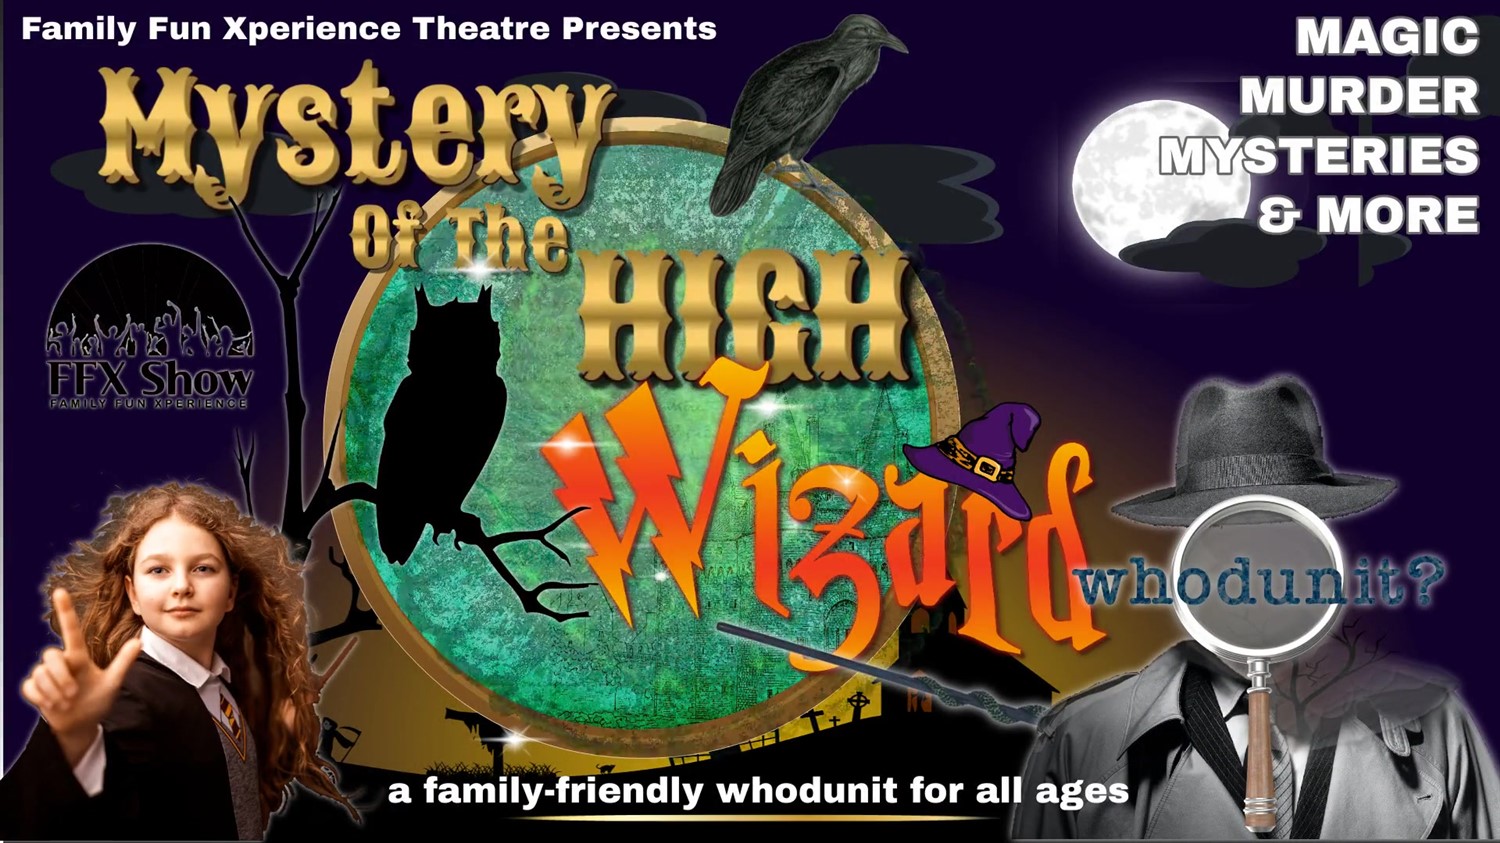 Whodunit? MYSTERY OF THE HIGH WIZARD Matinee Mystery + Game Show on oct. 21, 14:00@FFX Theatre - Choisissez un siège,Achetez des billets et obtenez des informations surFamily Fun Xperience tickets.ffxshow.org